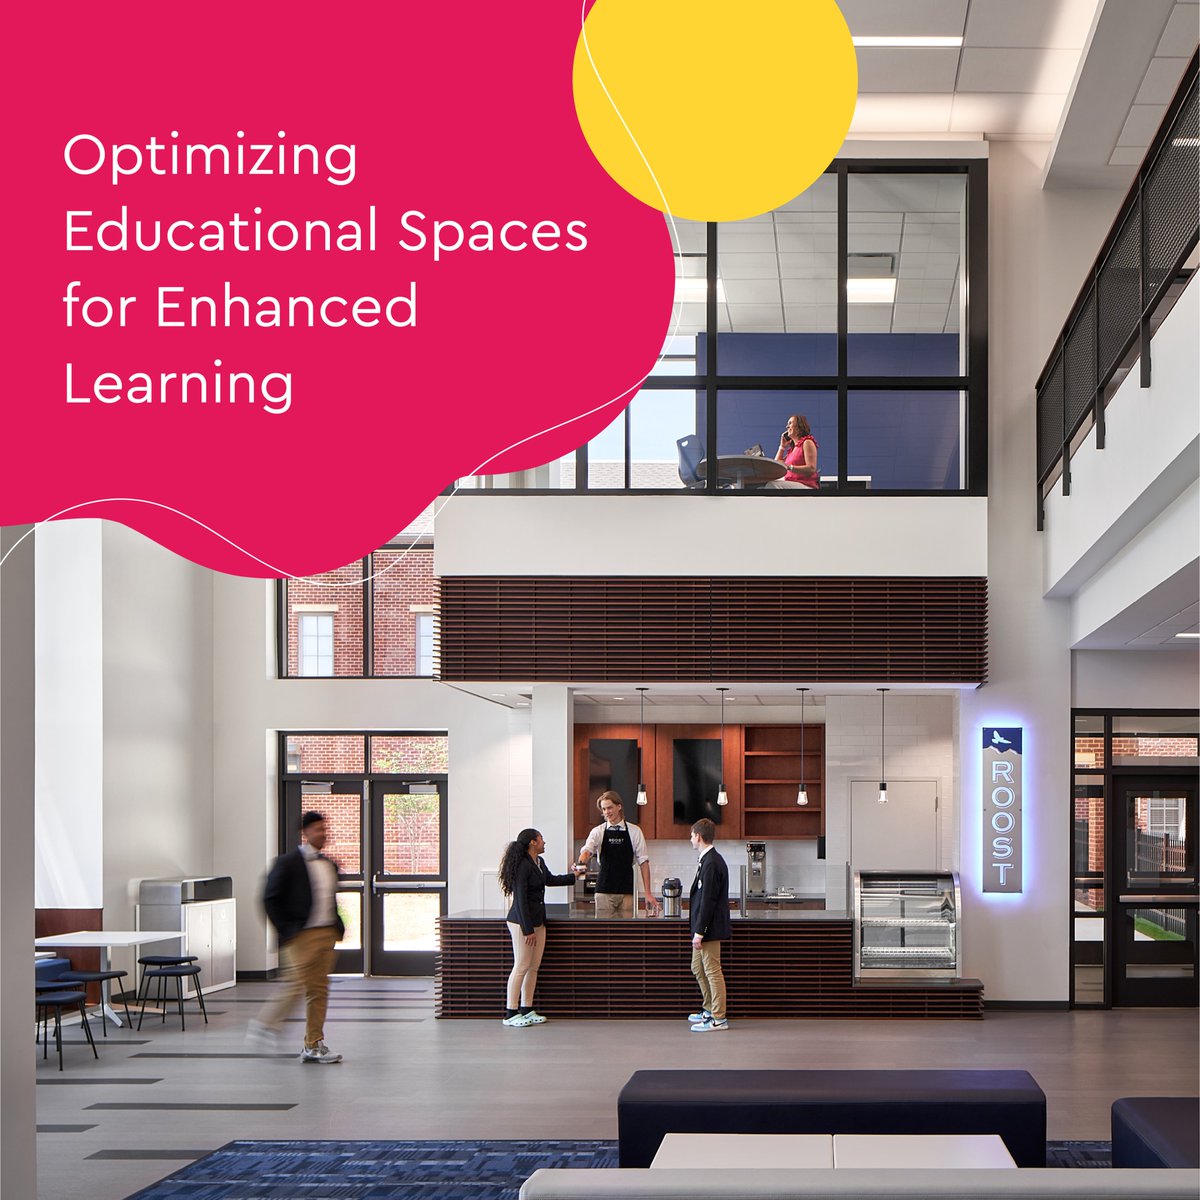 In this recent article, we take a look at how getting the bigger picture leads to transformative design that boosts efficiency, collaboration and student success. 🏫 💡 Check it out here: tvsdesign.com/optimizing-edu…